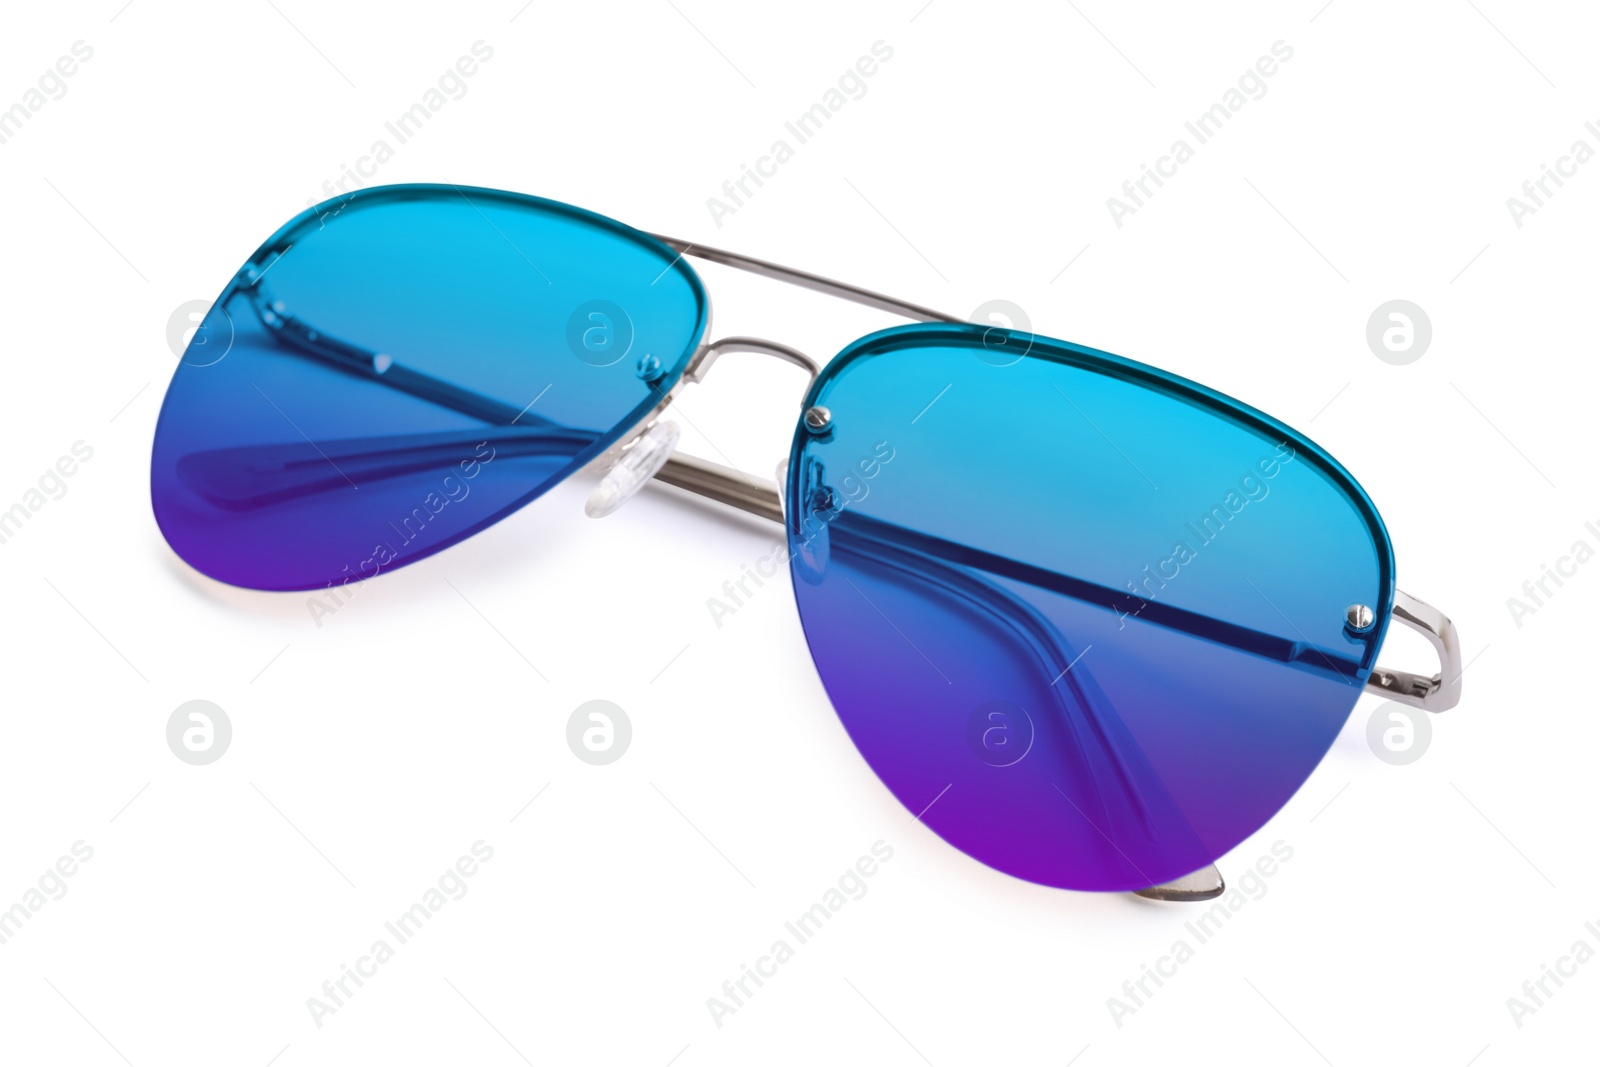 Image of New stylish aviator sunglasses with color lenses on white background